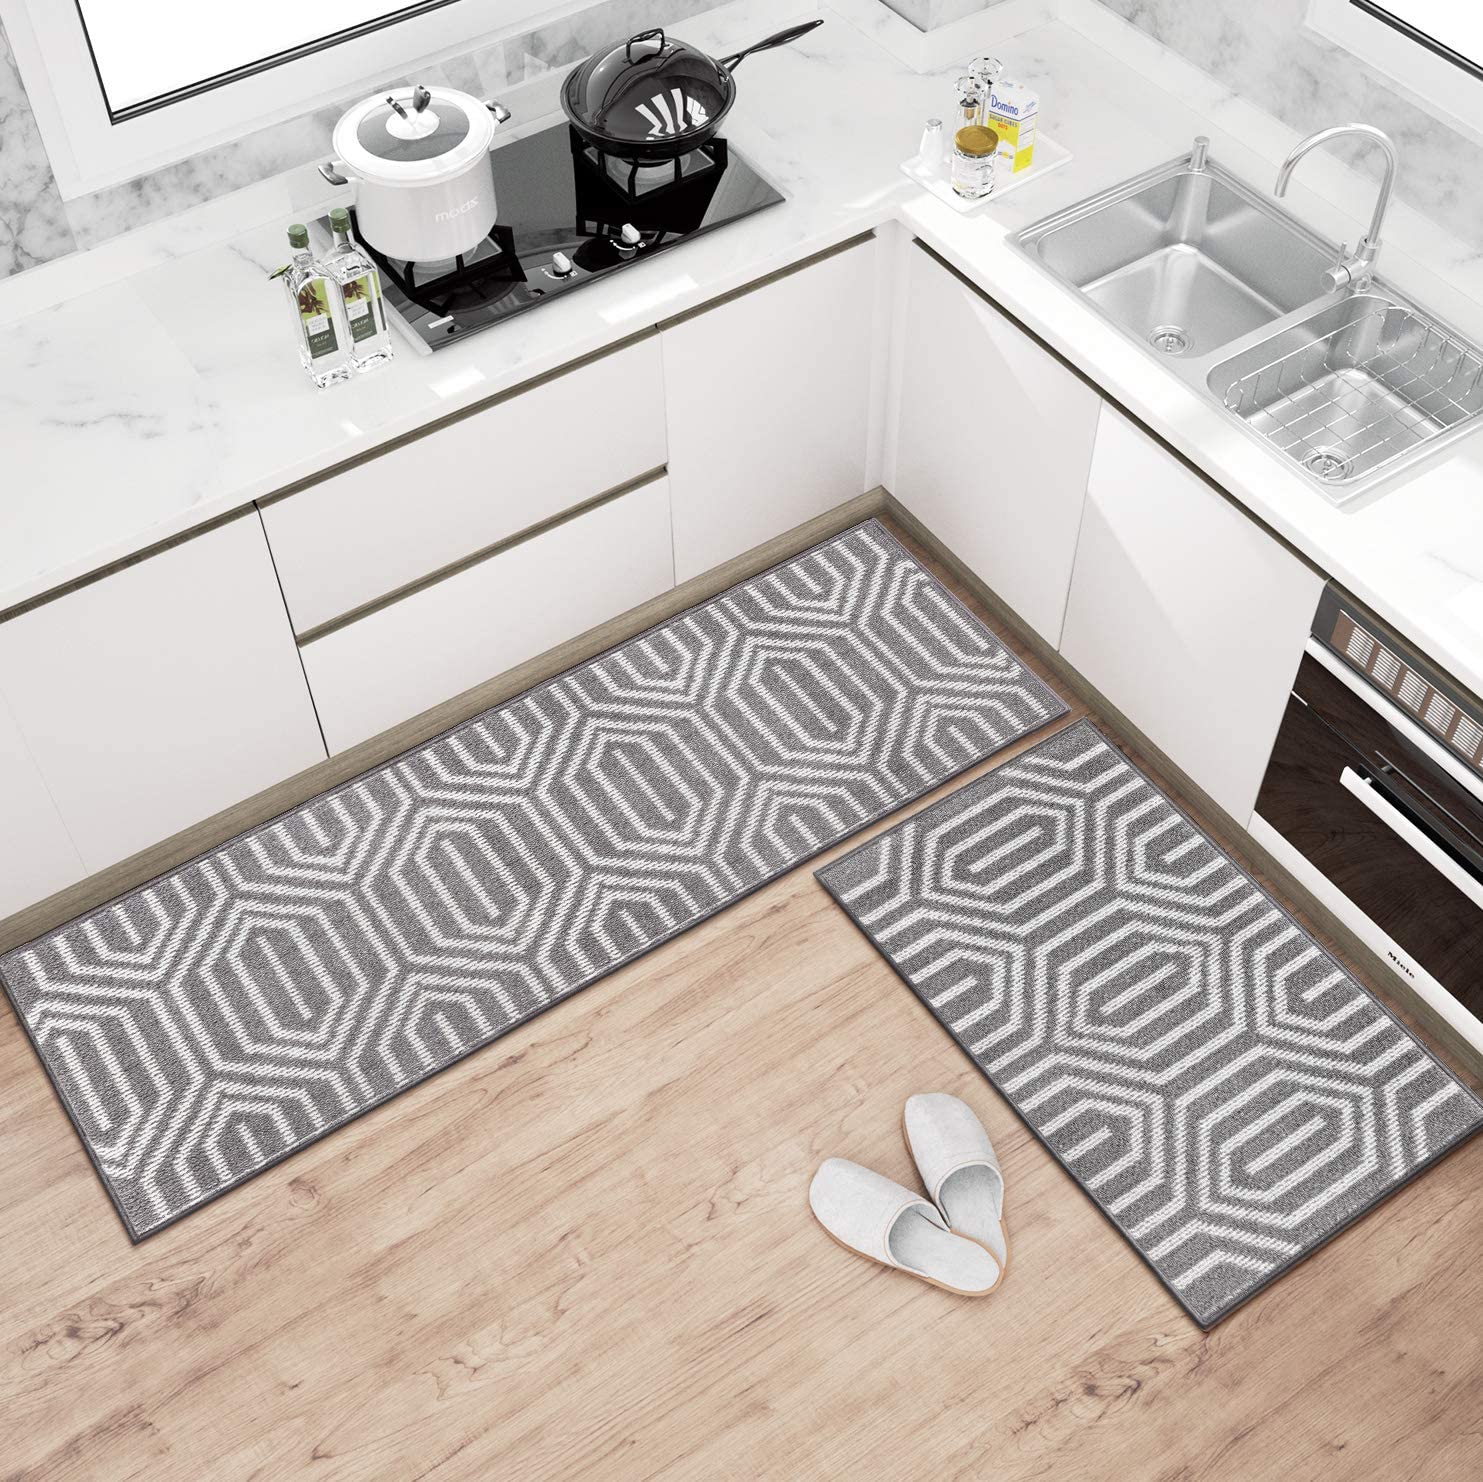 What color should kitchen rugs be?